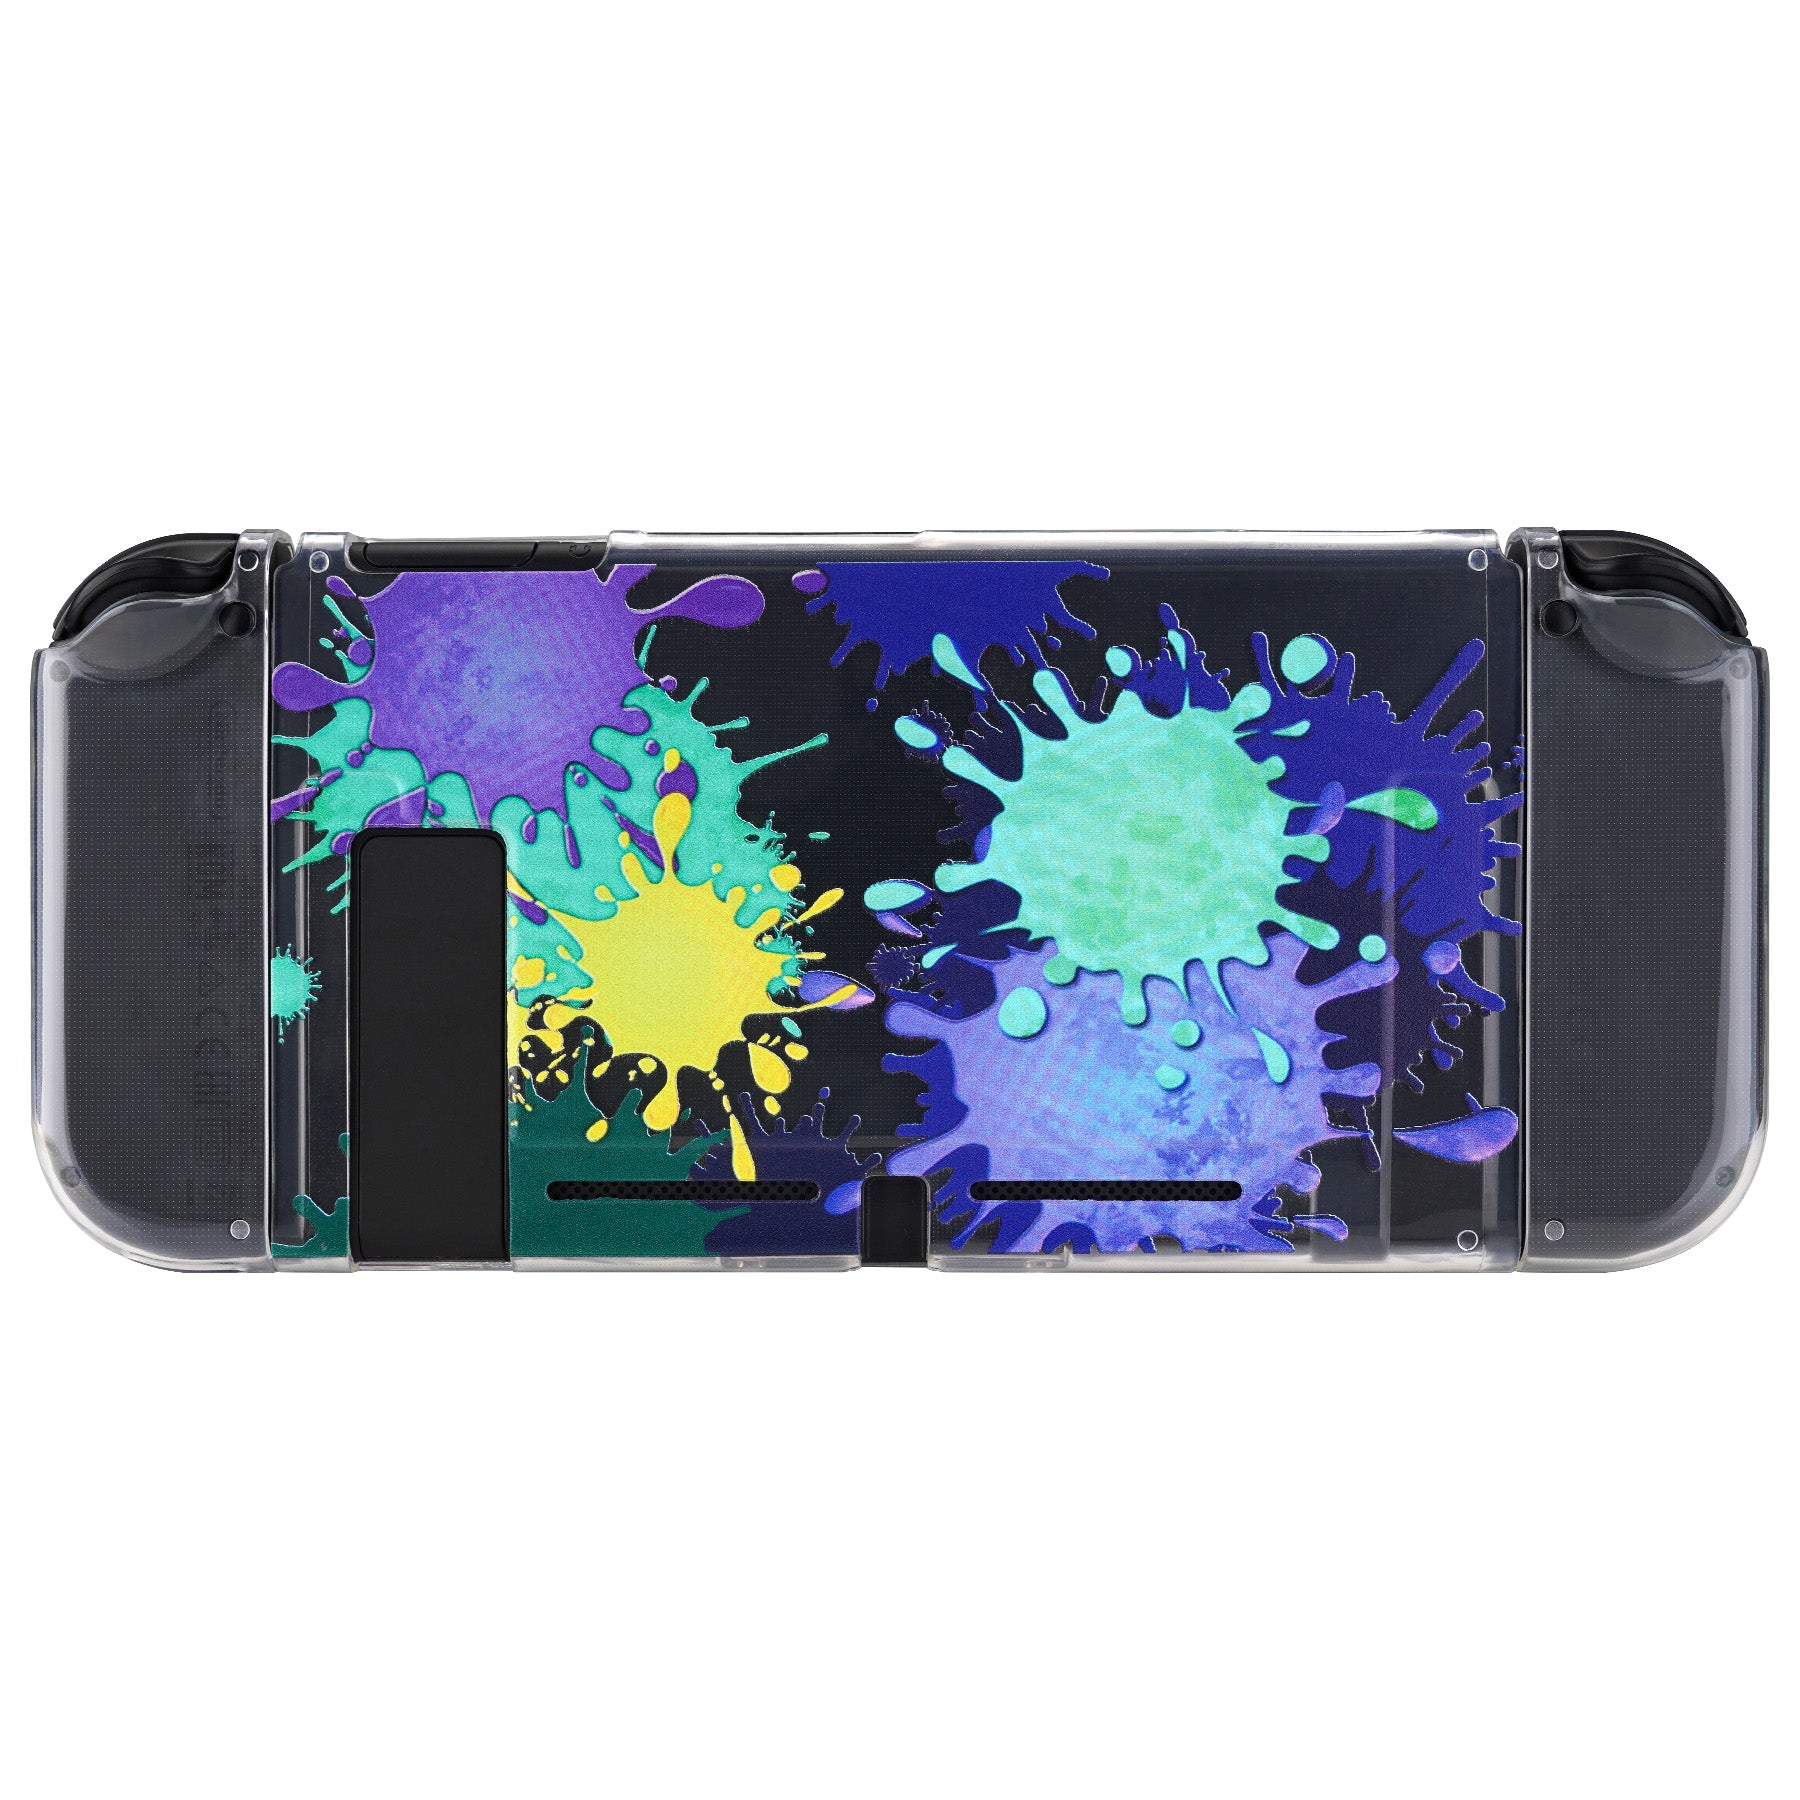 PlayVital Protective Case for Nintendo Switch, Soft TPU Slim Case Cover for Nintendo Switch Console with Colorful ABXY Direction Button Caps - Splattering Paint - NTU6030 PlayVital